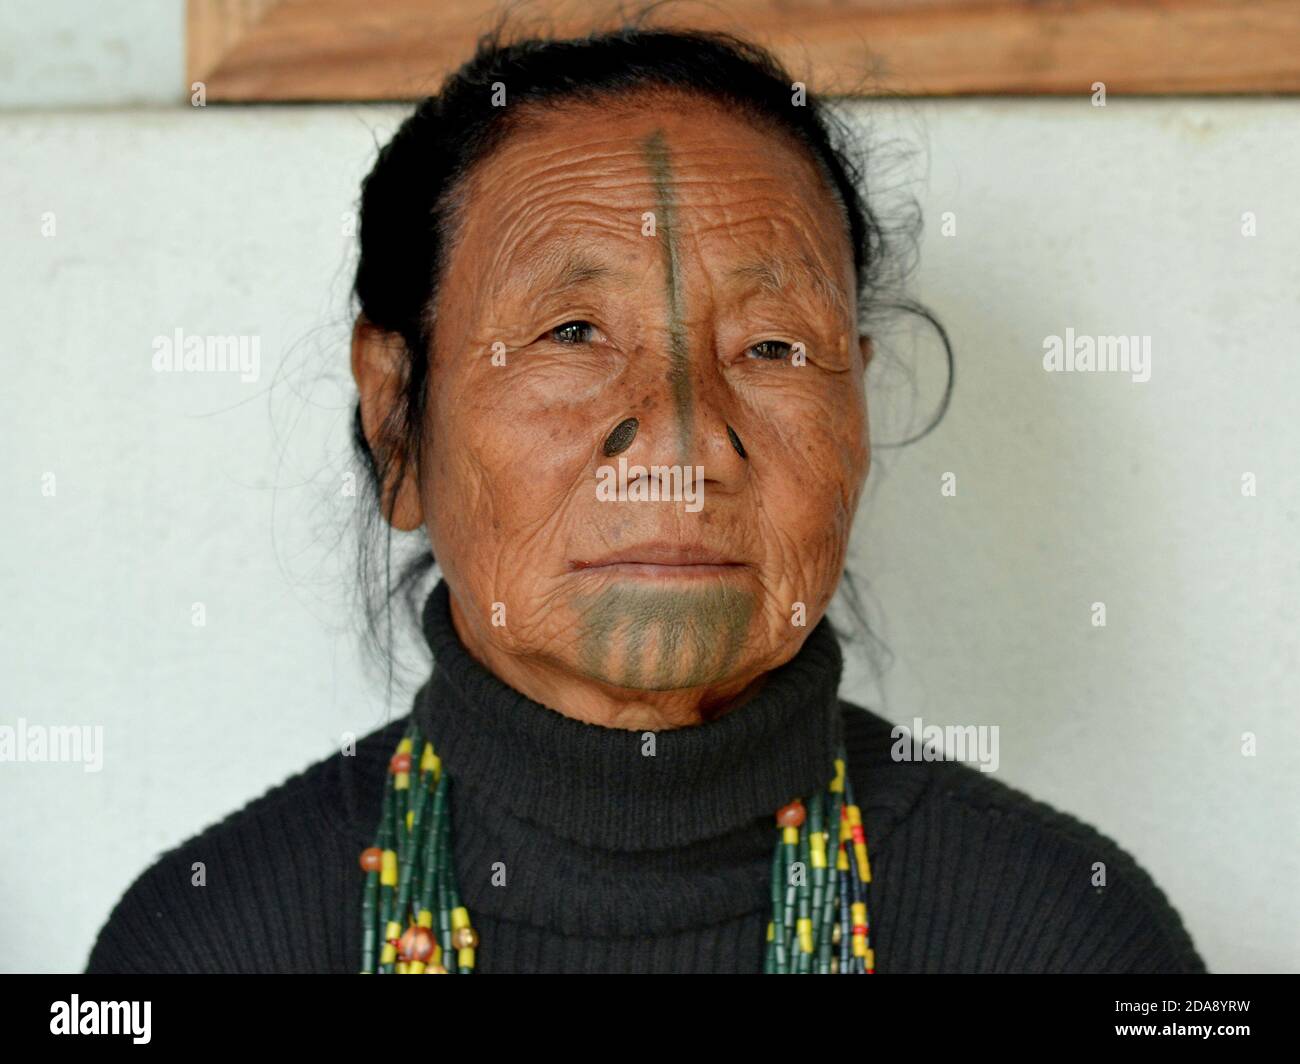 Elderly Northeast Indian Apatani ethnic minority tribal woman with black wooden nose plugs and traditional face tattoos poses for the camera. Stock Photo